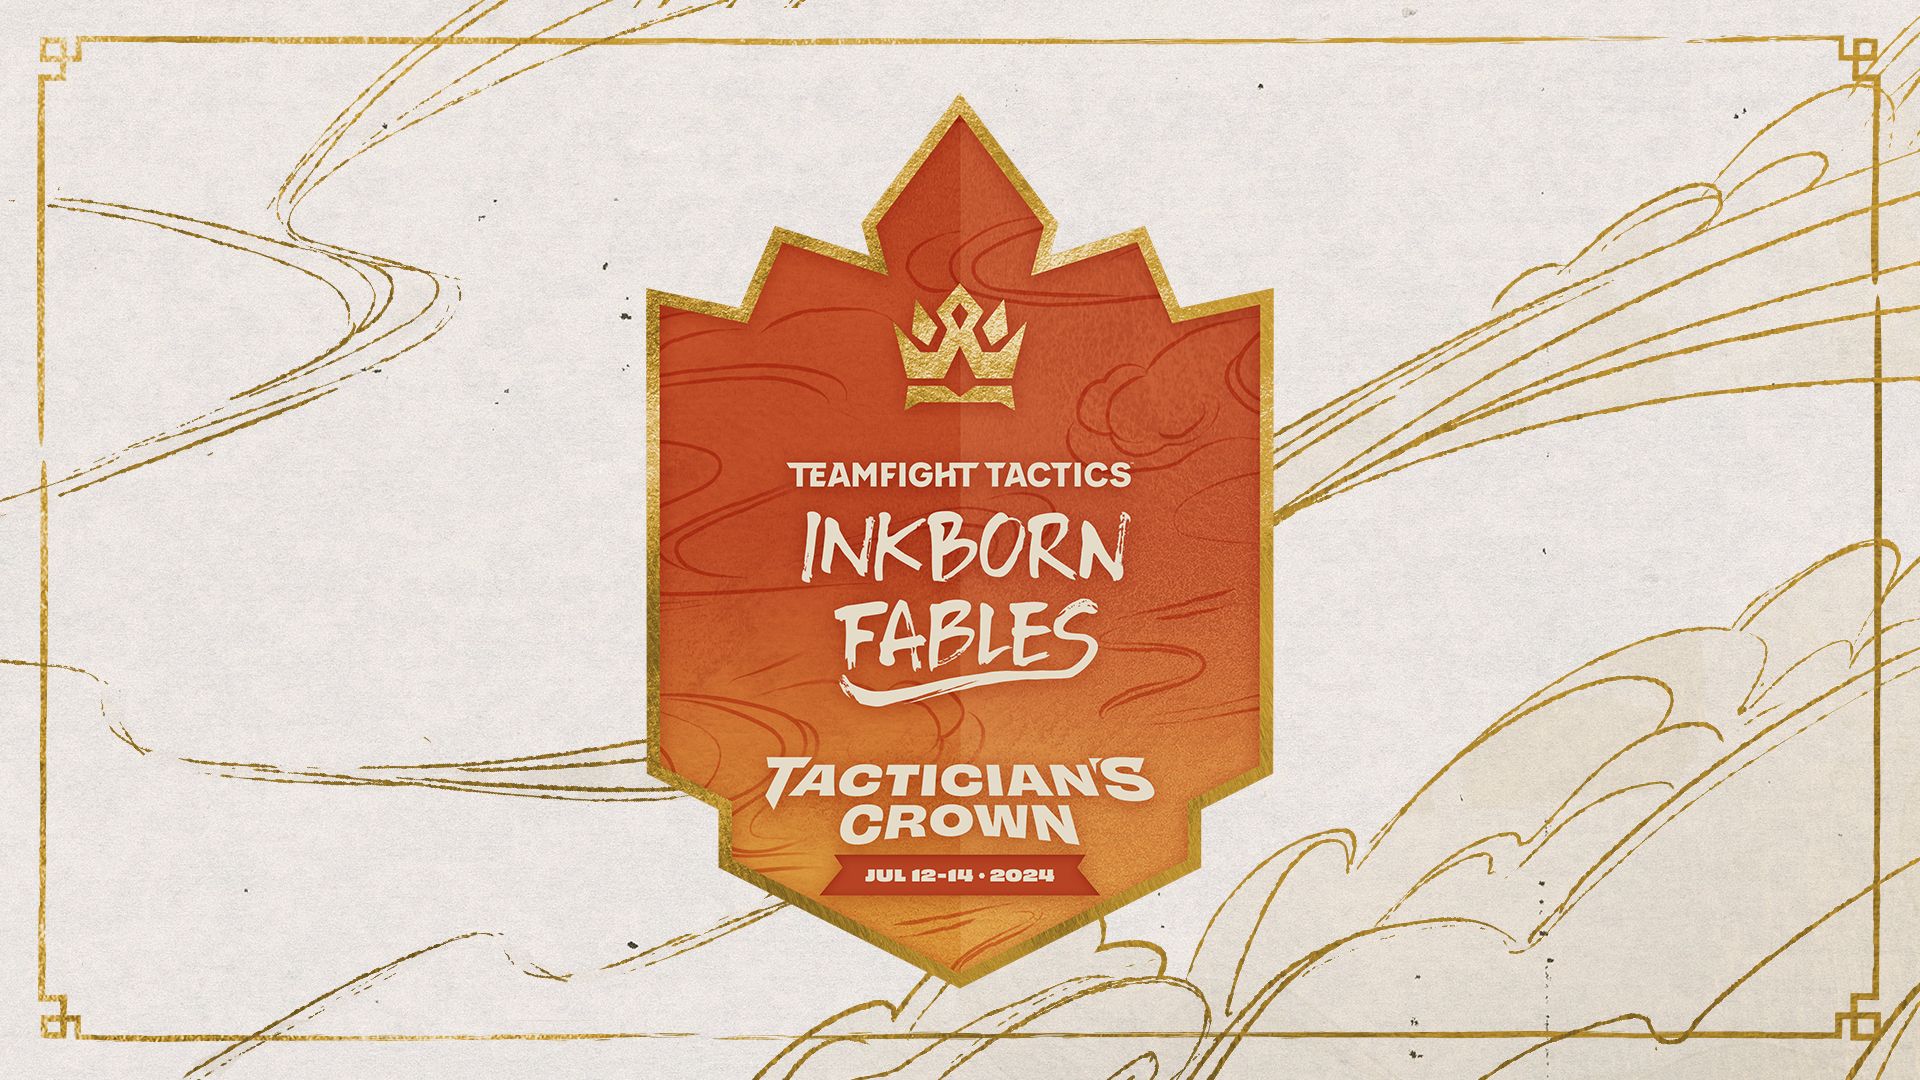 Everything You Need to Know About the TFT Tactician’s Crown: Dates, Prize Pool, and More